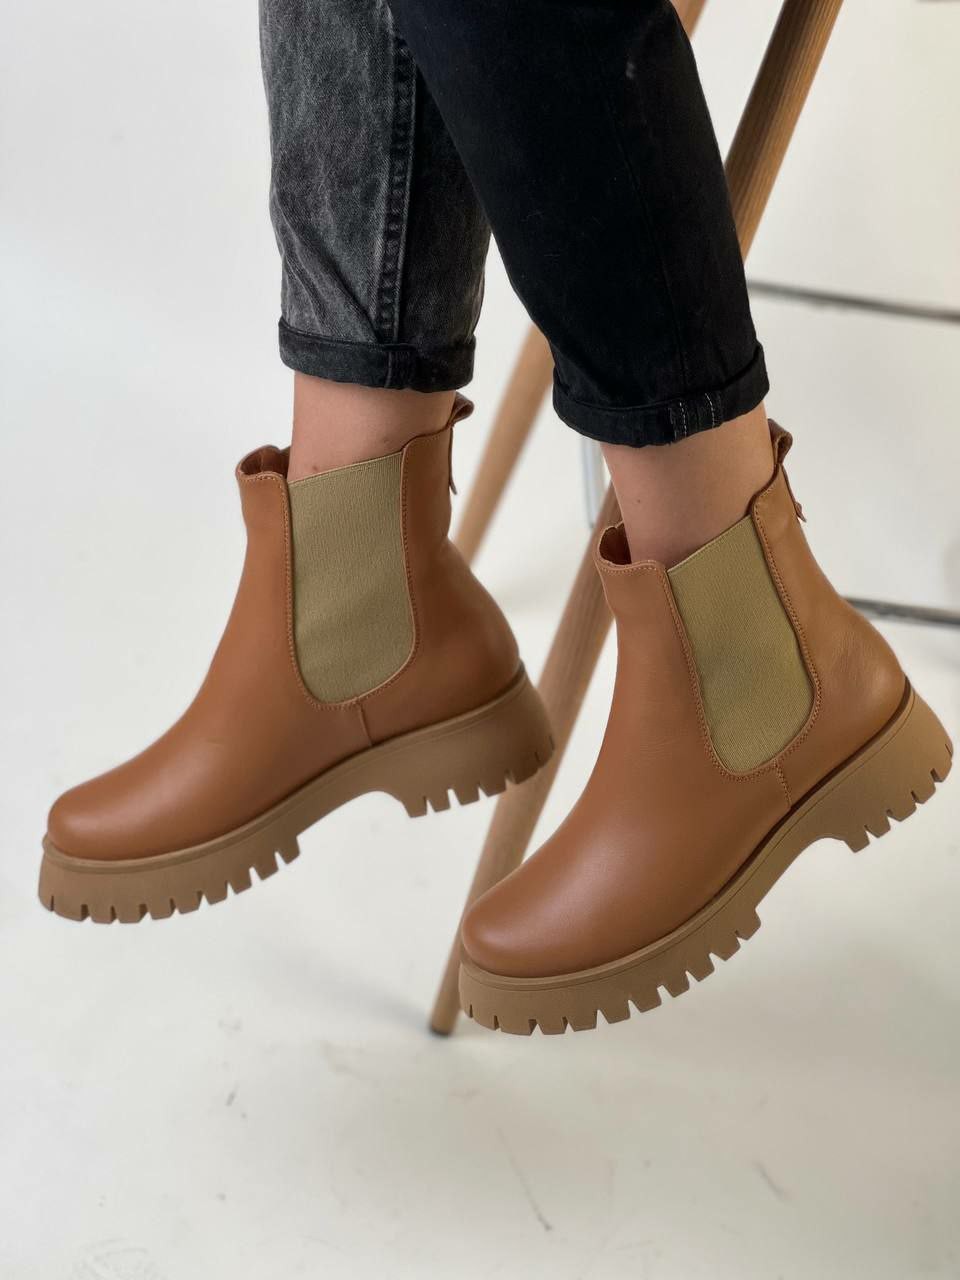 Chelsea boots in caramel color